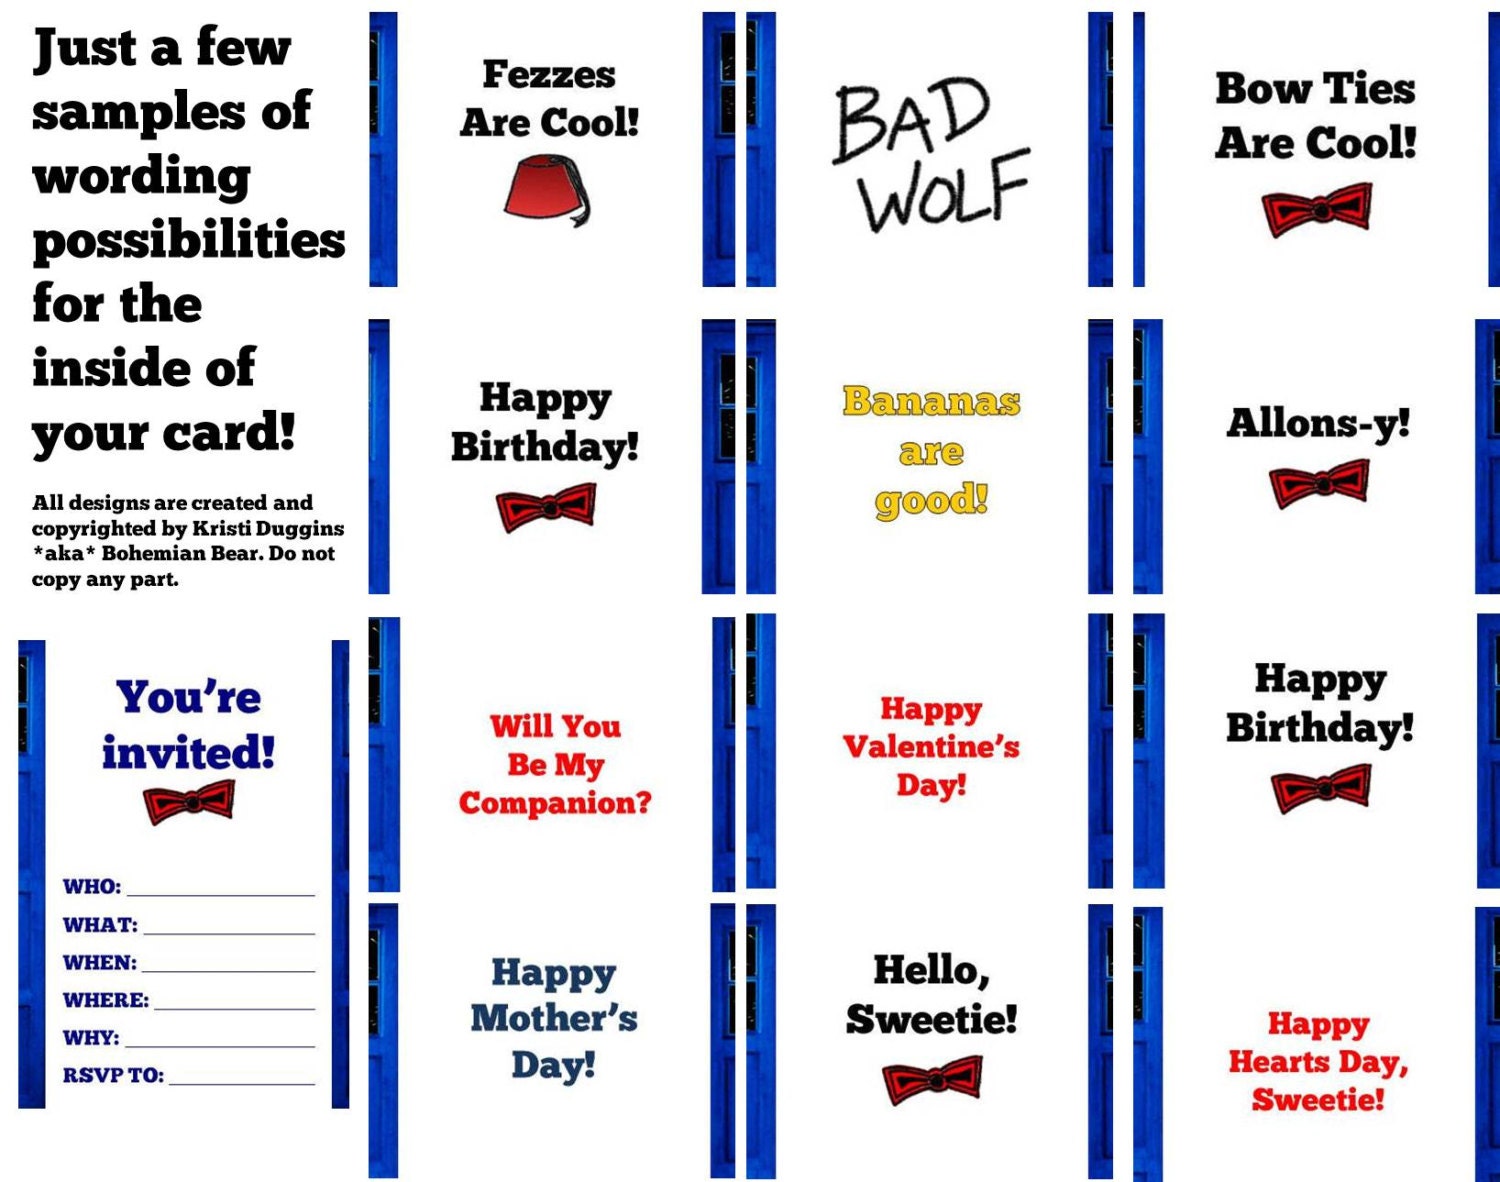 Doctor Who Inspired TARDIS Greeting Card, Blue Police Box by Bohemian Bear, Happy Mother's or Father's Day, Easter